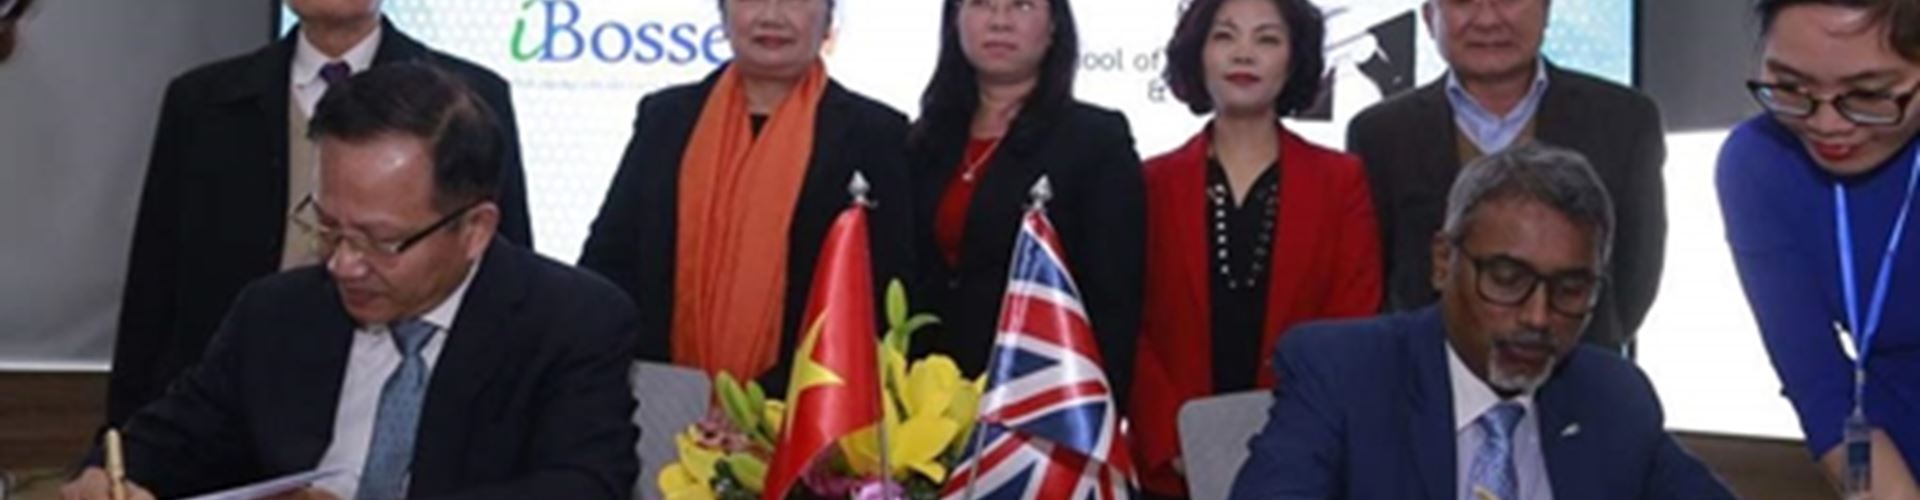 London School of Business And Finance in Singapore signed strategic collaboration agreement with iBosses Vietnam